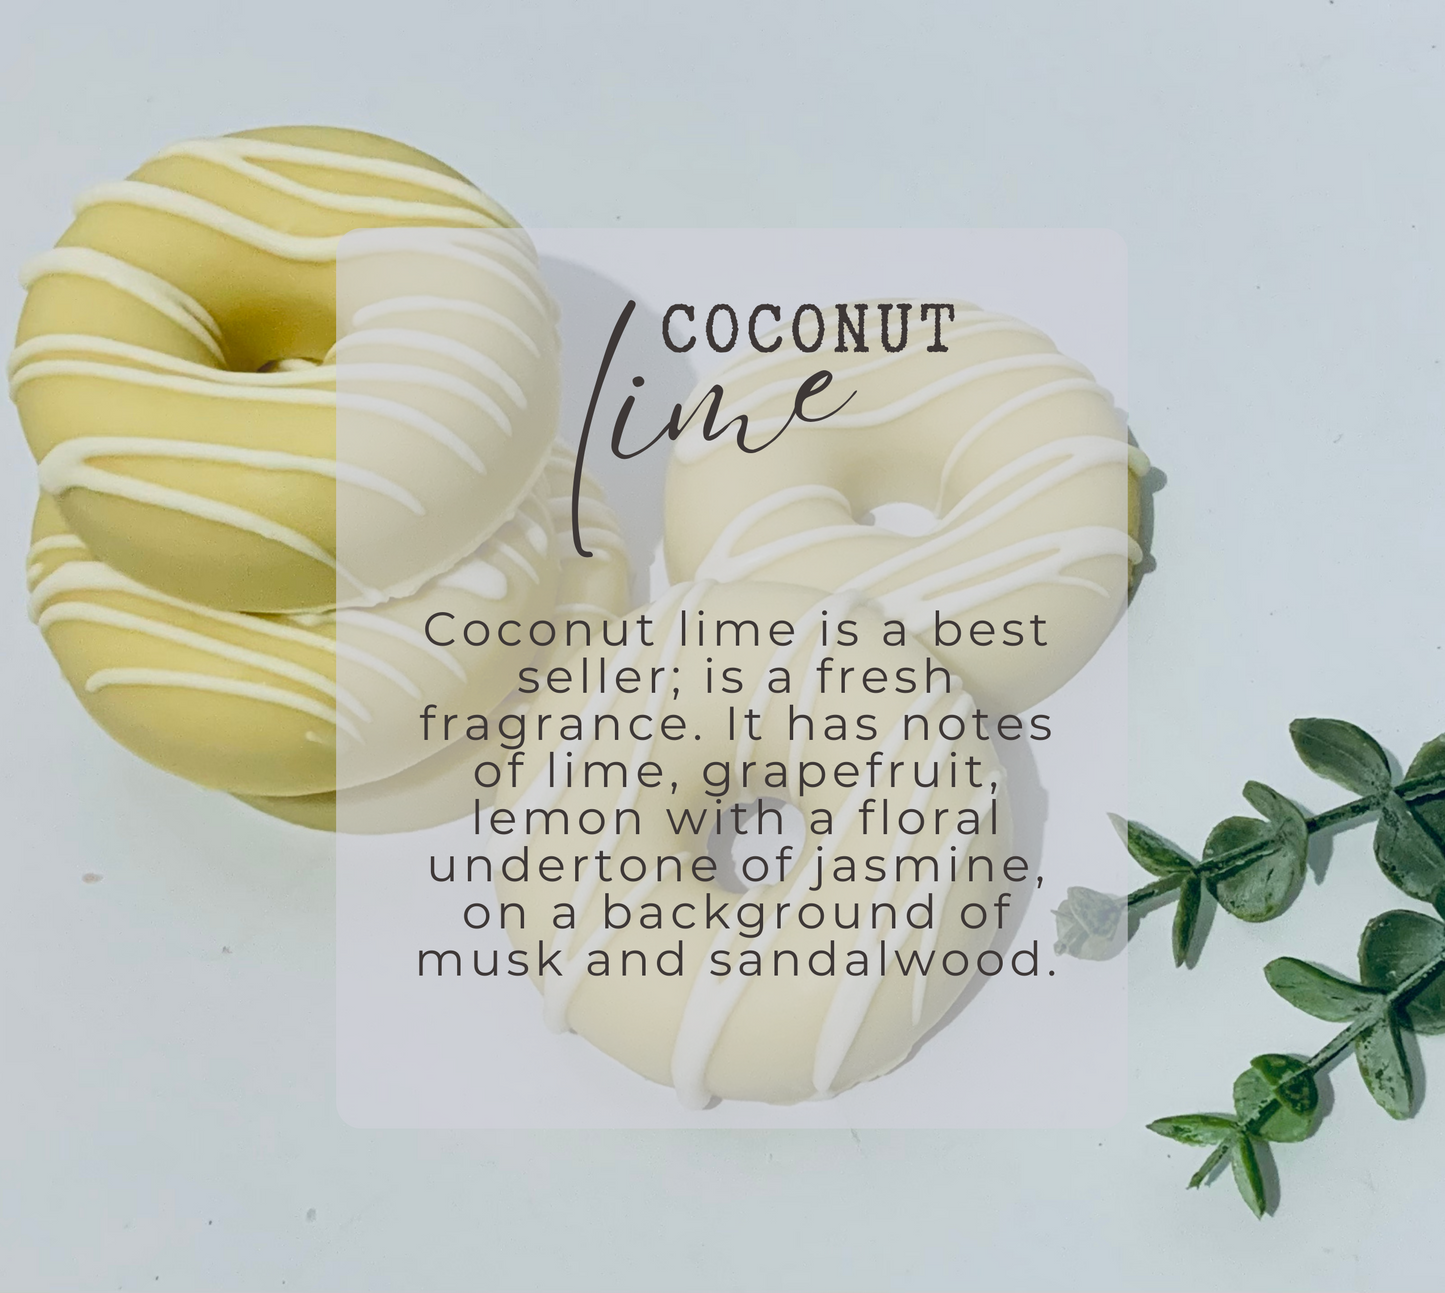 This donut soap is scented with Coconut lime fragrance. This fragrance is a best seller; is a fresh fragrance. It has notes of lime, grapefruit, lemon with a floral undertone of jasmine, on a background of musk and sandalwood